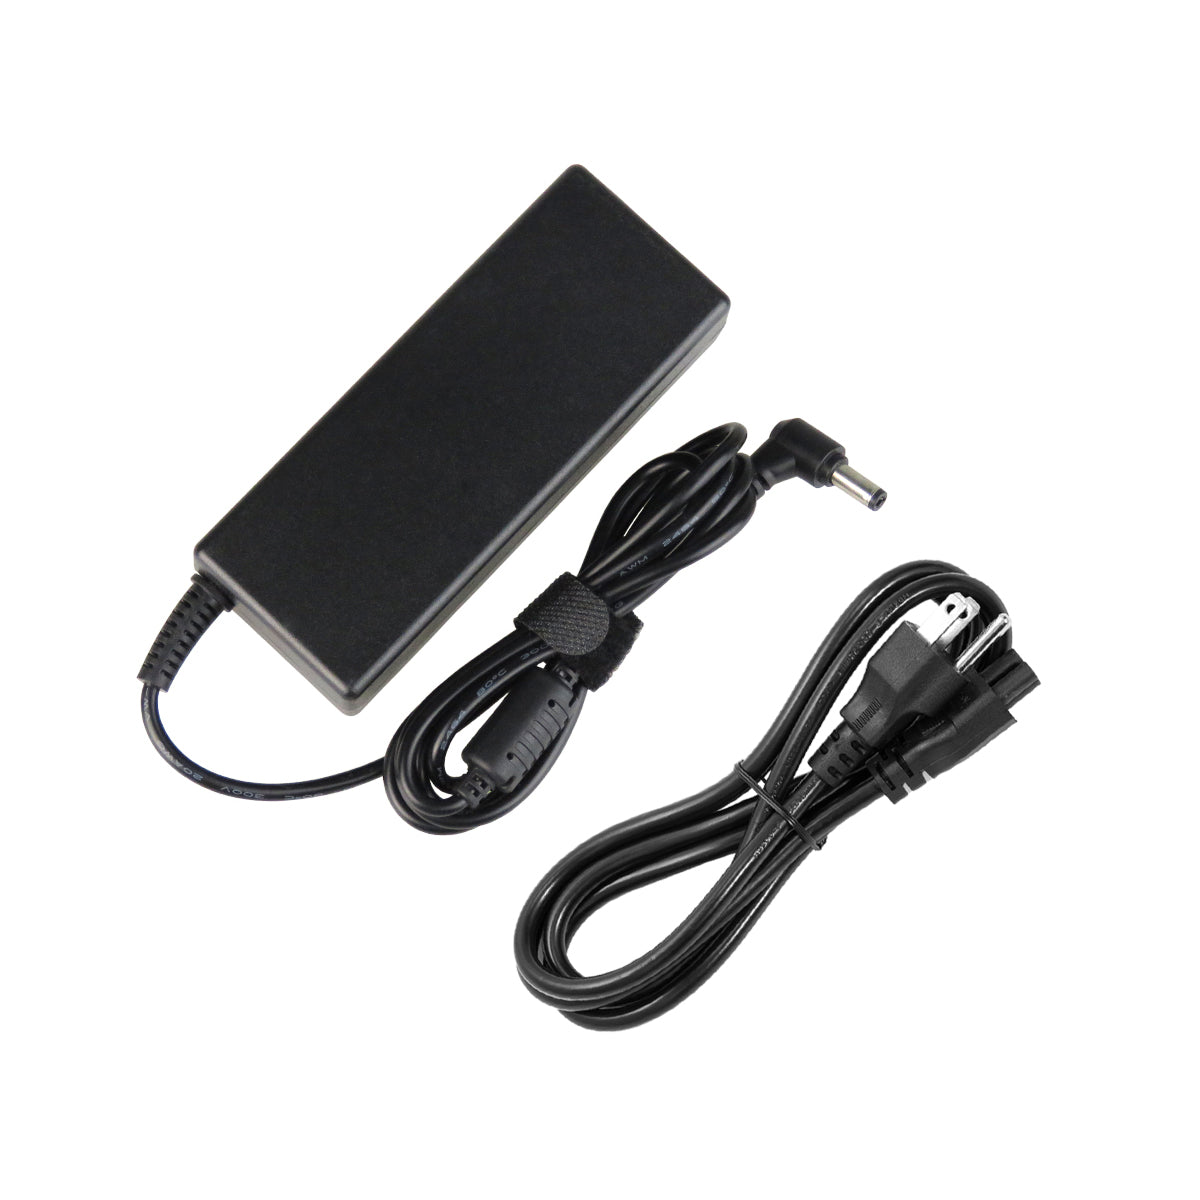 AC Adapter Charger for ASUS N55VM Notebook.